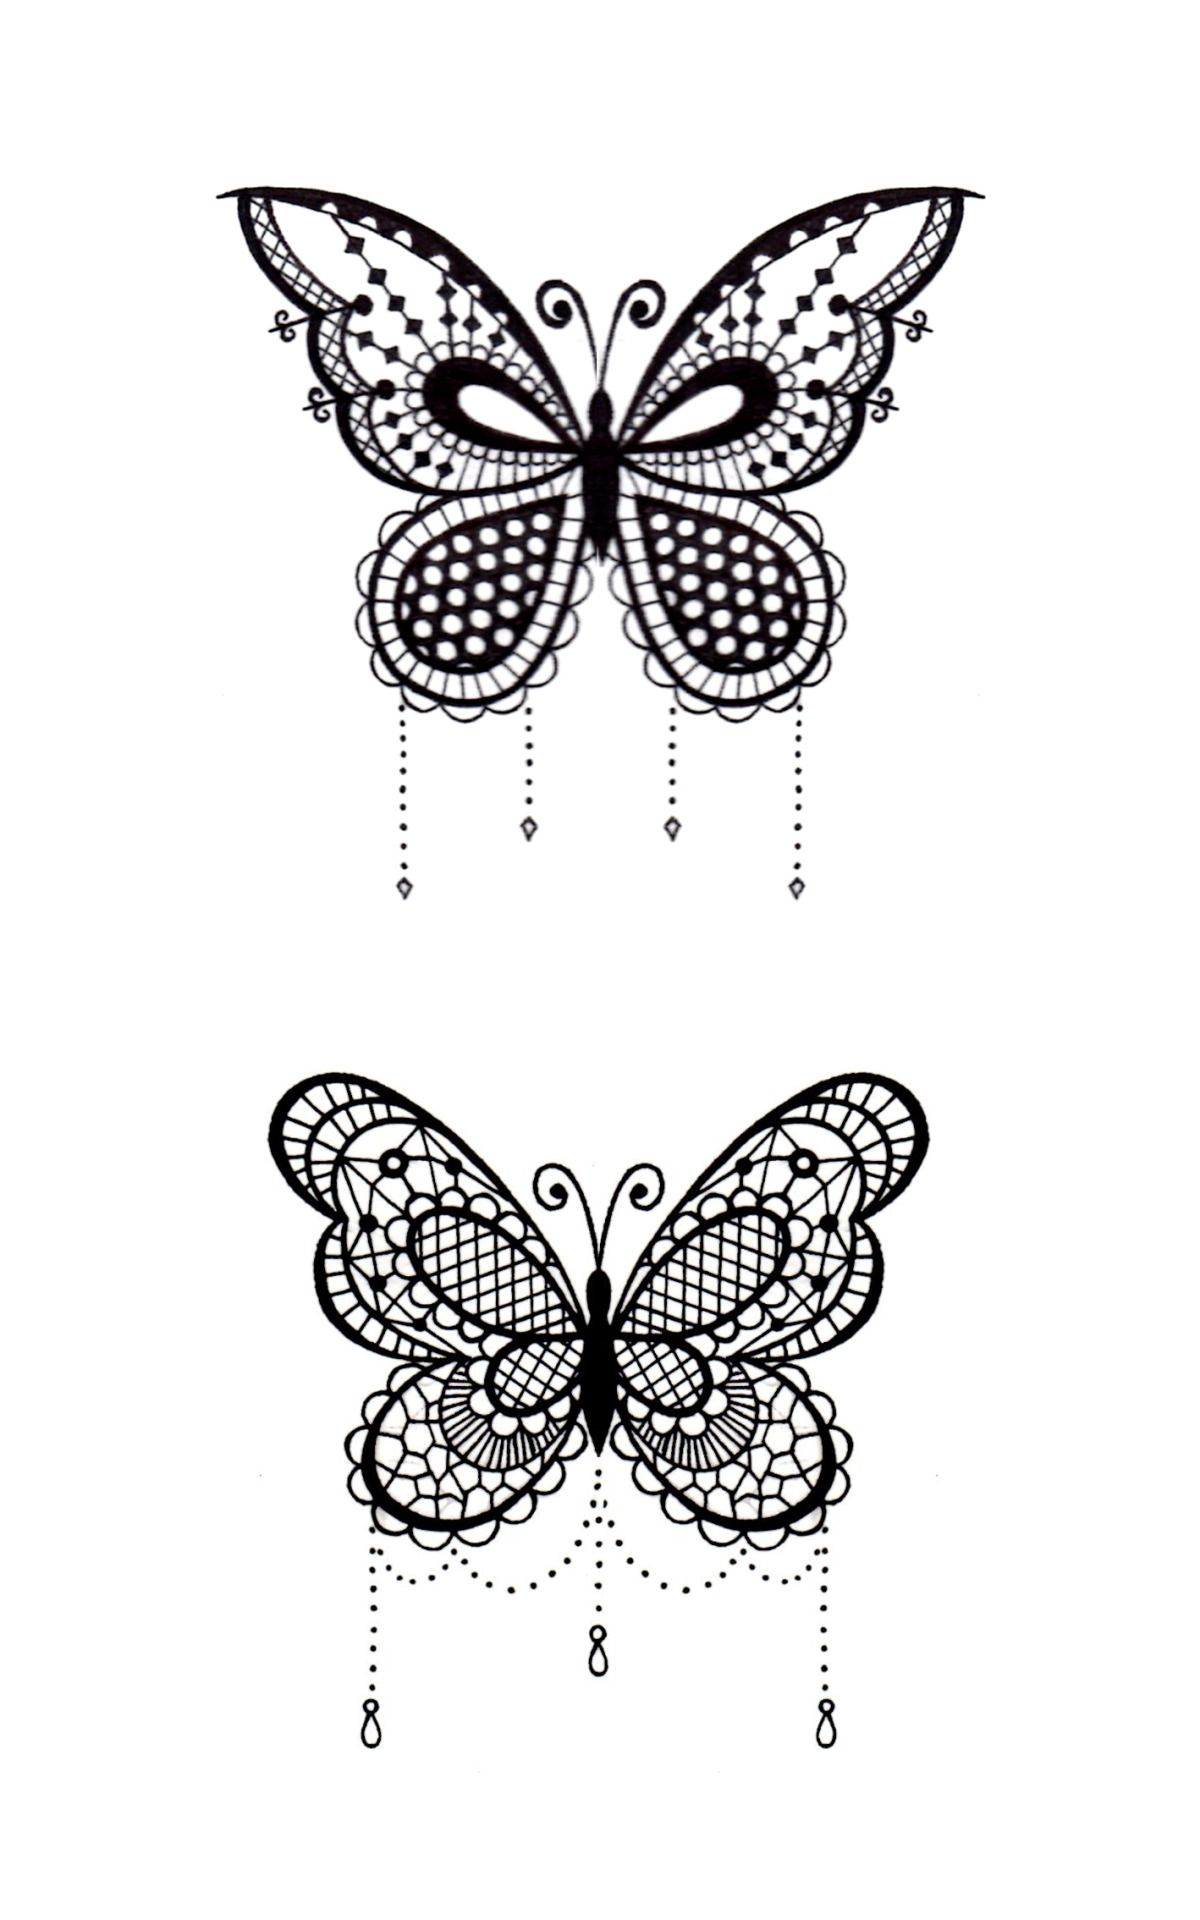 Lace Butterfly Tattoo Google Search Tattoos Lace Butterfly in size 1200 X 1920